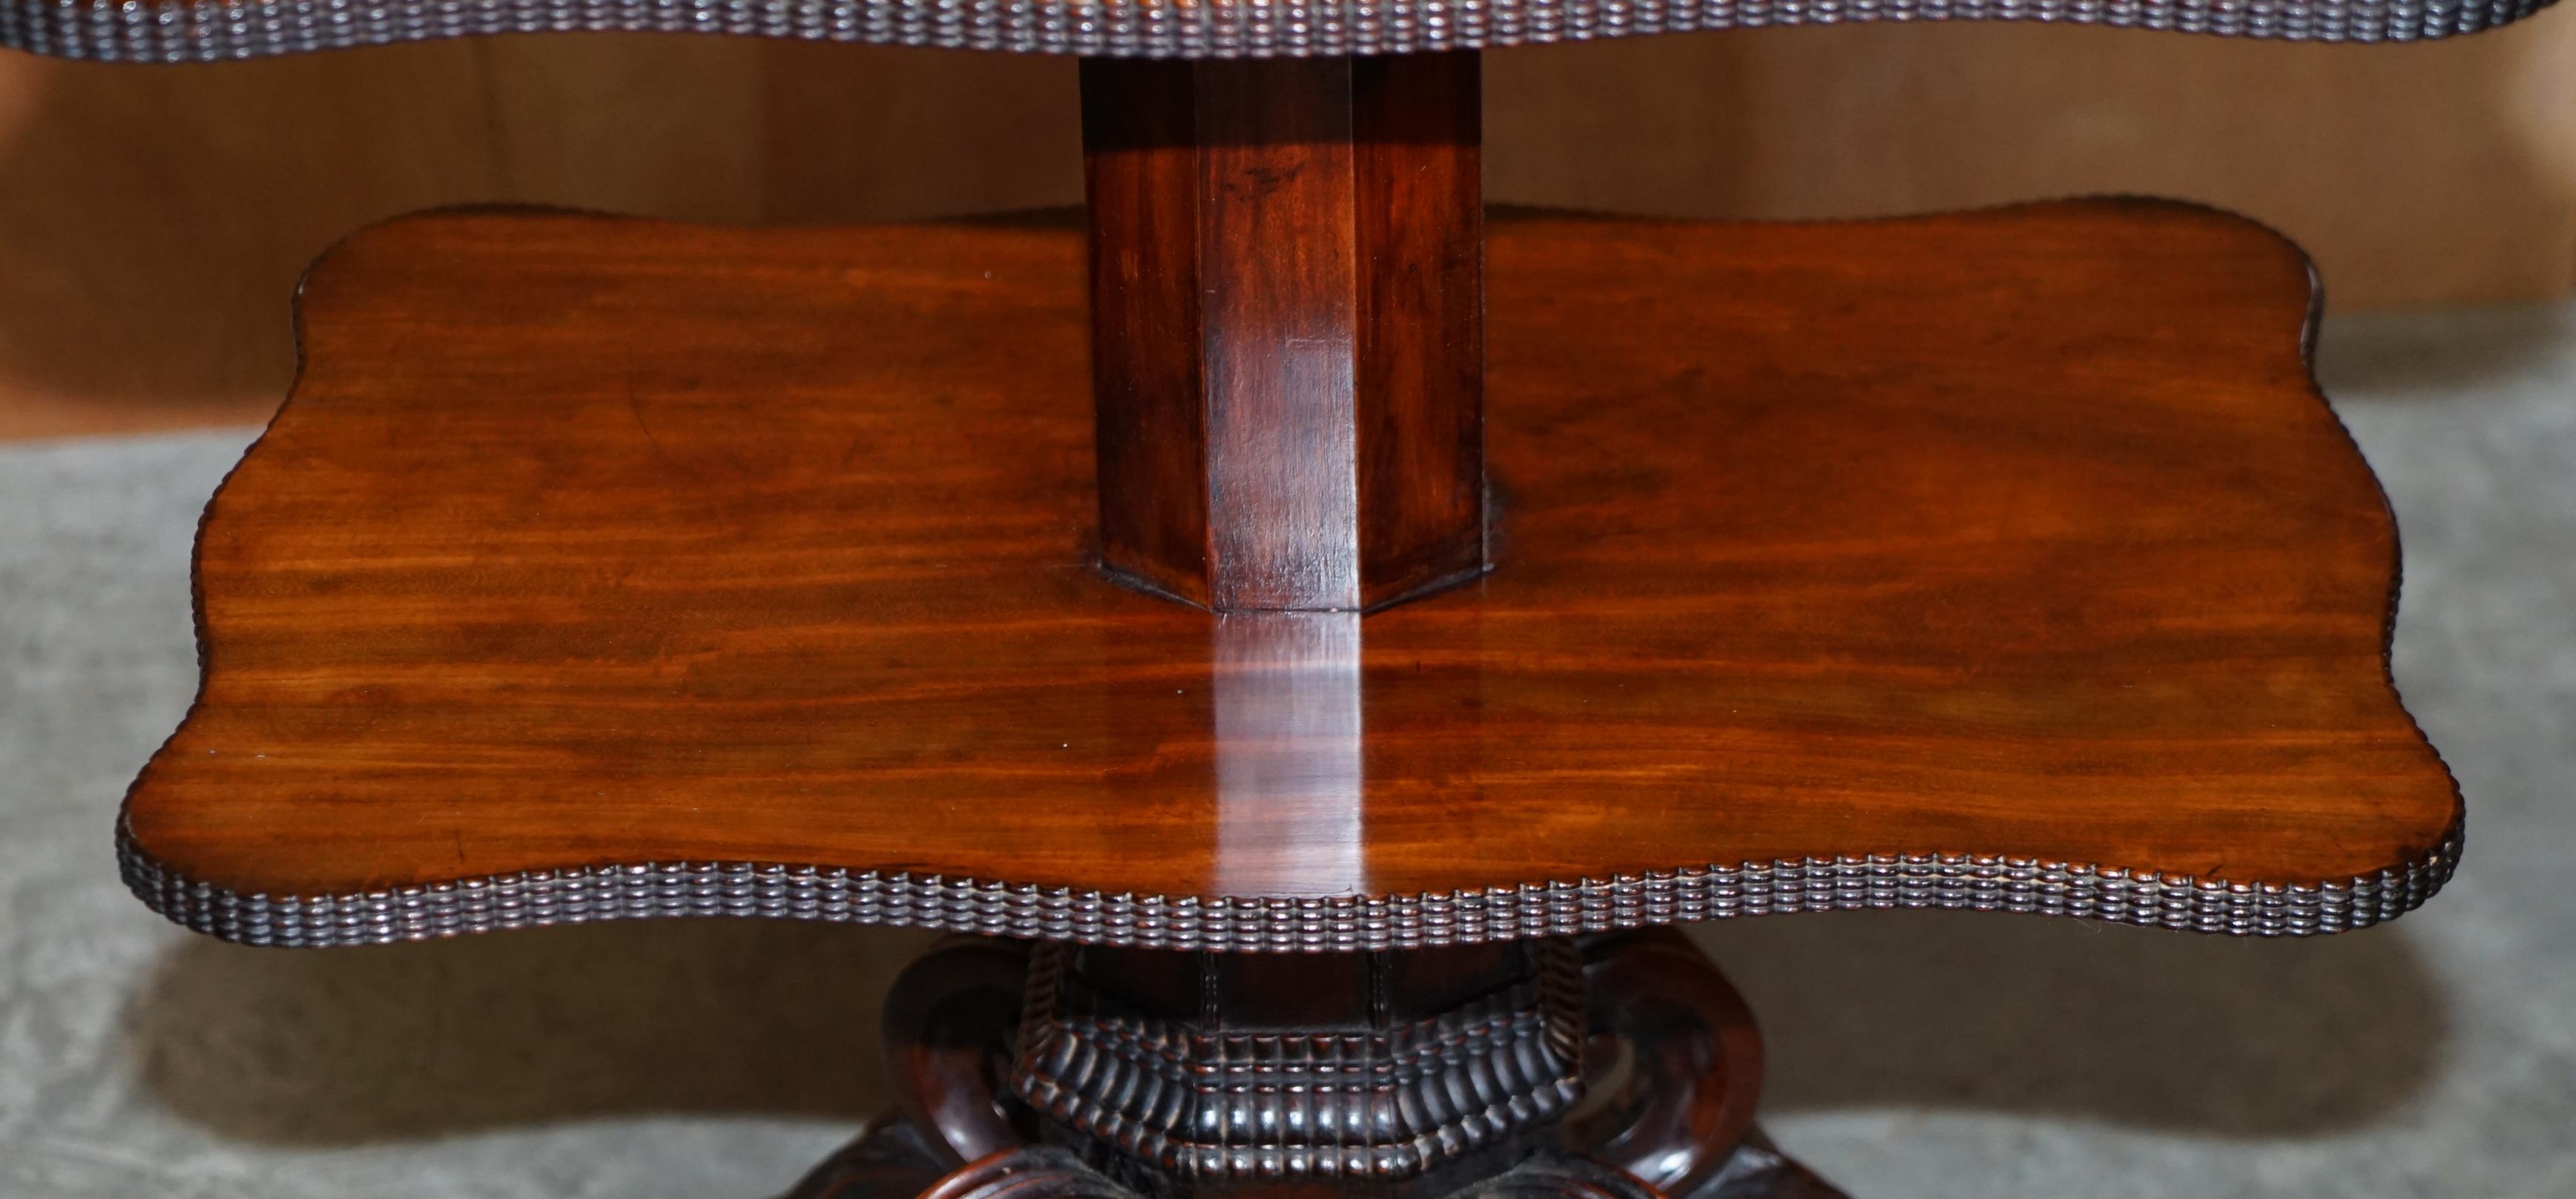 Hand-Crafted Restored Antique Gillows Cuban Hardwood Dumb Waiter Metamorphic Occasional Table For Sale